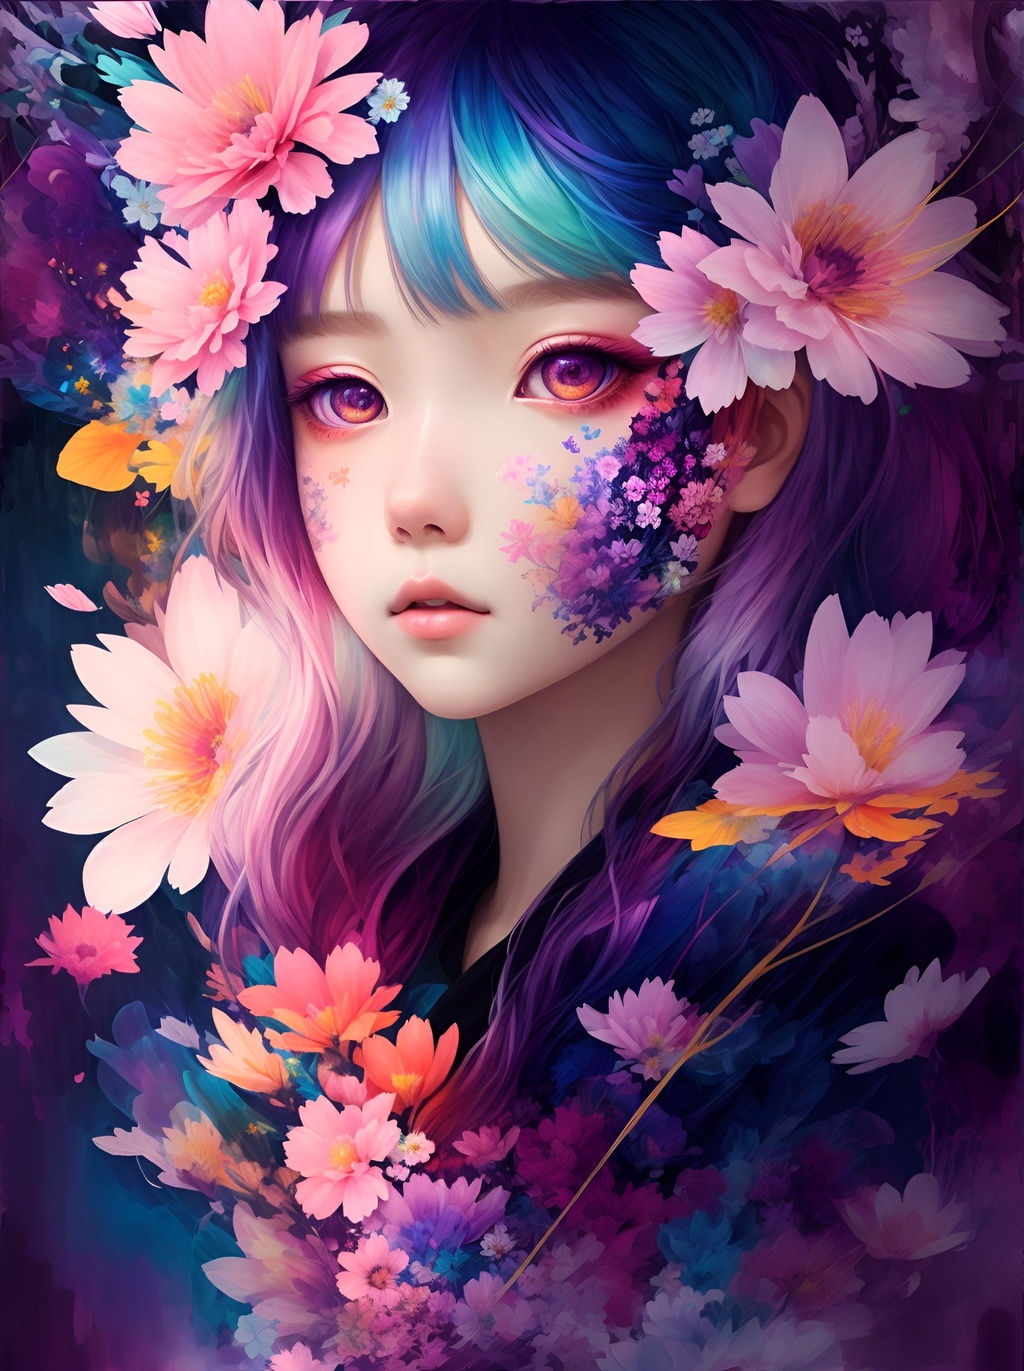 Prompt: ambient light, masterpiece, ultra-high quality, (ultra detailed original illustration), (1girl, upper body), ((Harajuku fashion)), ((flowers with human eyes, flower eyes)), double exposure, fusion of fluid abstract art, glitch, (2d), (original illustration composition), (fusion of limited color, maximalism artstyle, geometric artstyle, butterflies, junk art)